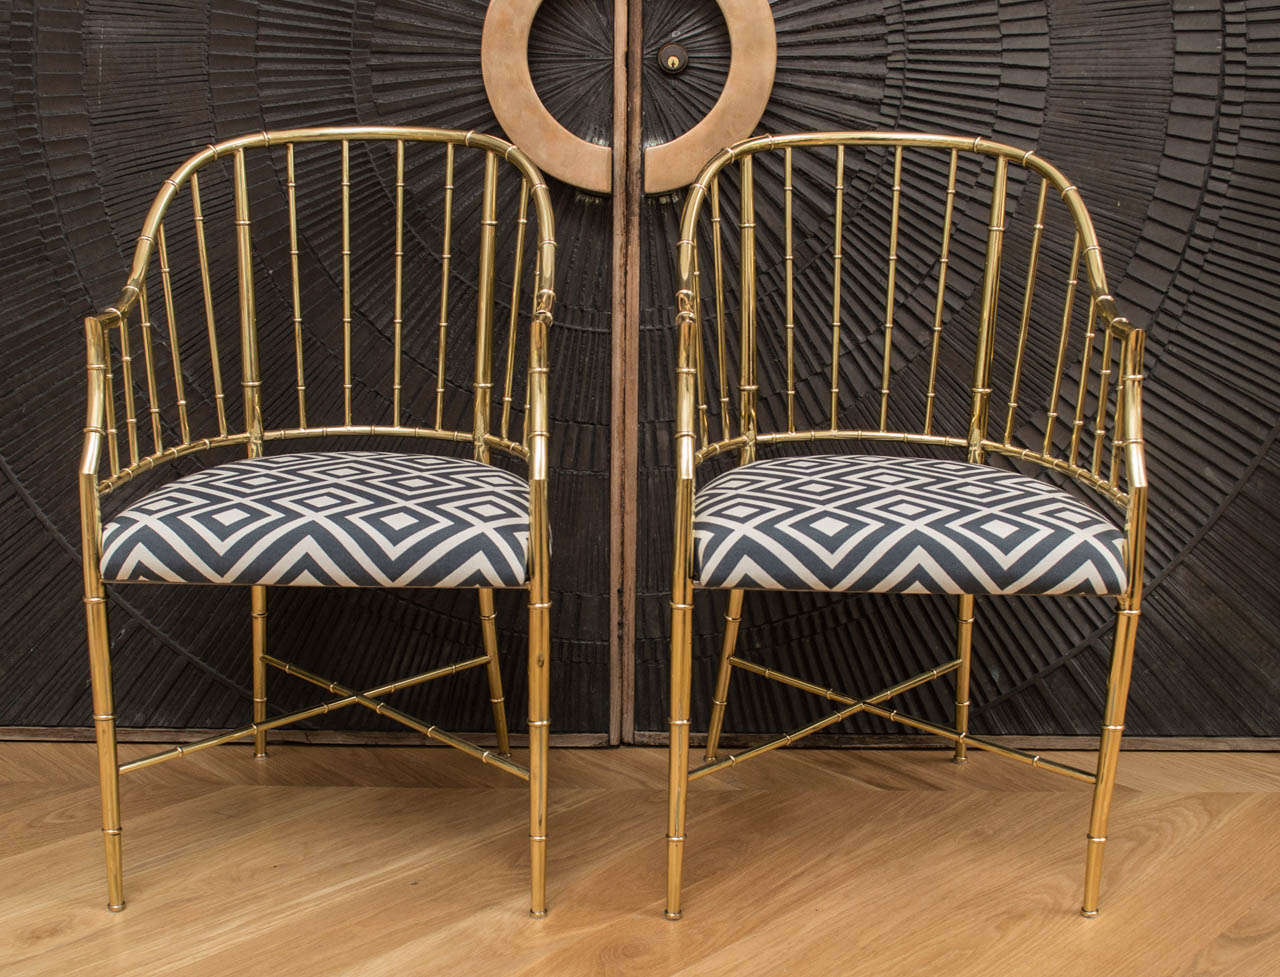 Pair of polished brass Mastercraft chairs.